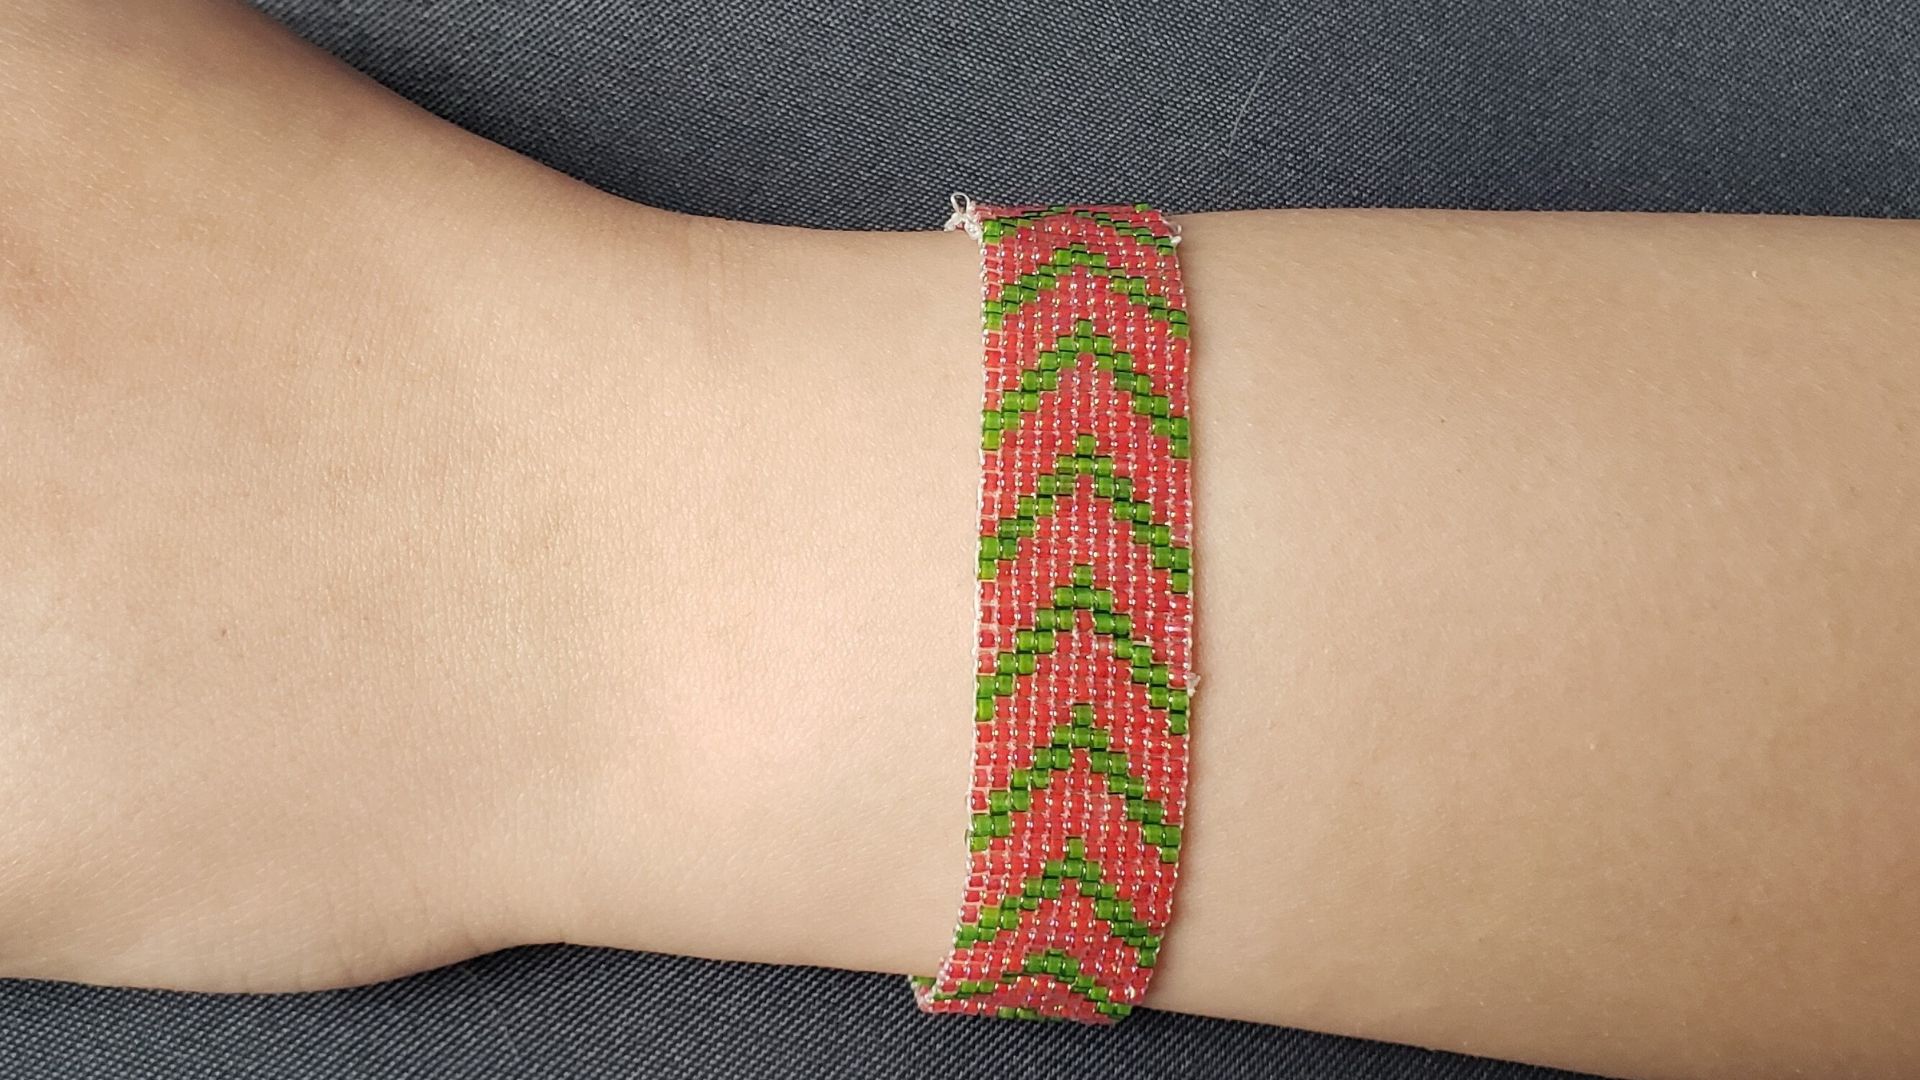 Red And Green Bracelet On Woman's Wrist